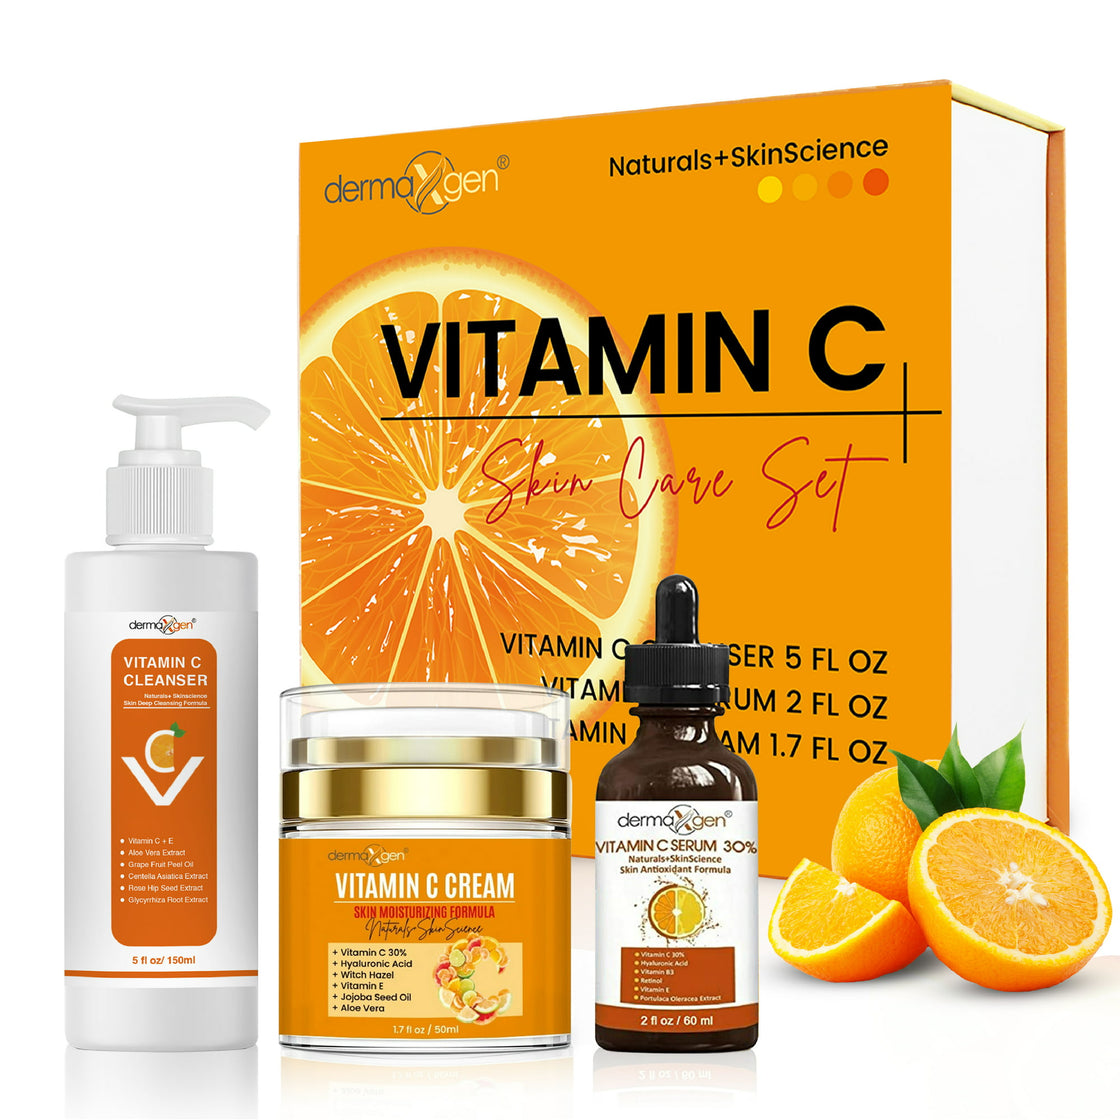 Dermaxgen Vitamin C Complete Facial Care Anti-Aging Set with Cleanser, Moisturizer and Serum for Wrinkles, and Dark Spots. Day & Night Skincare Gift Set